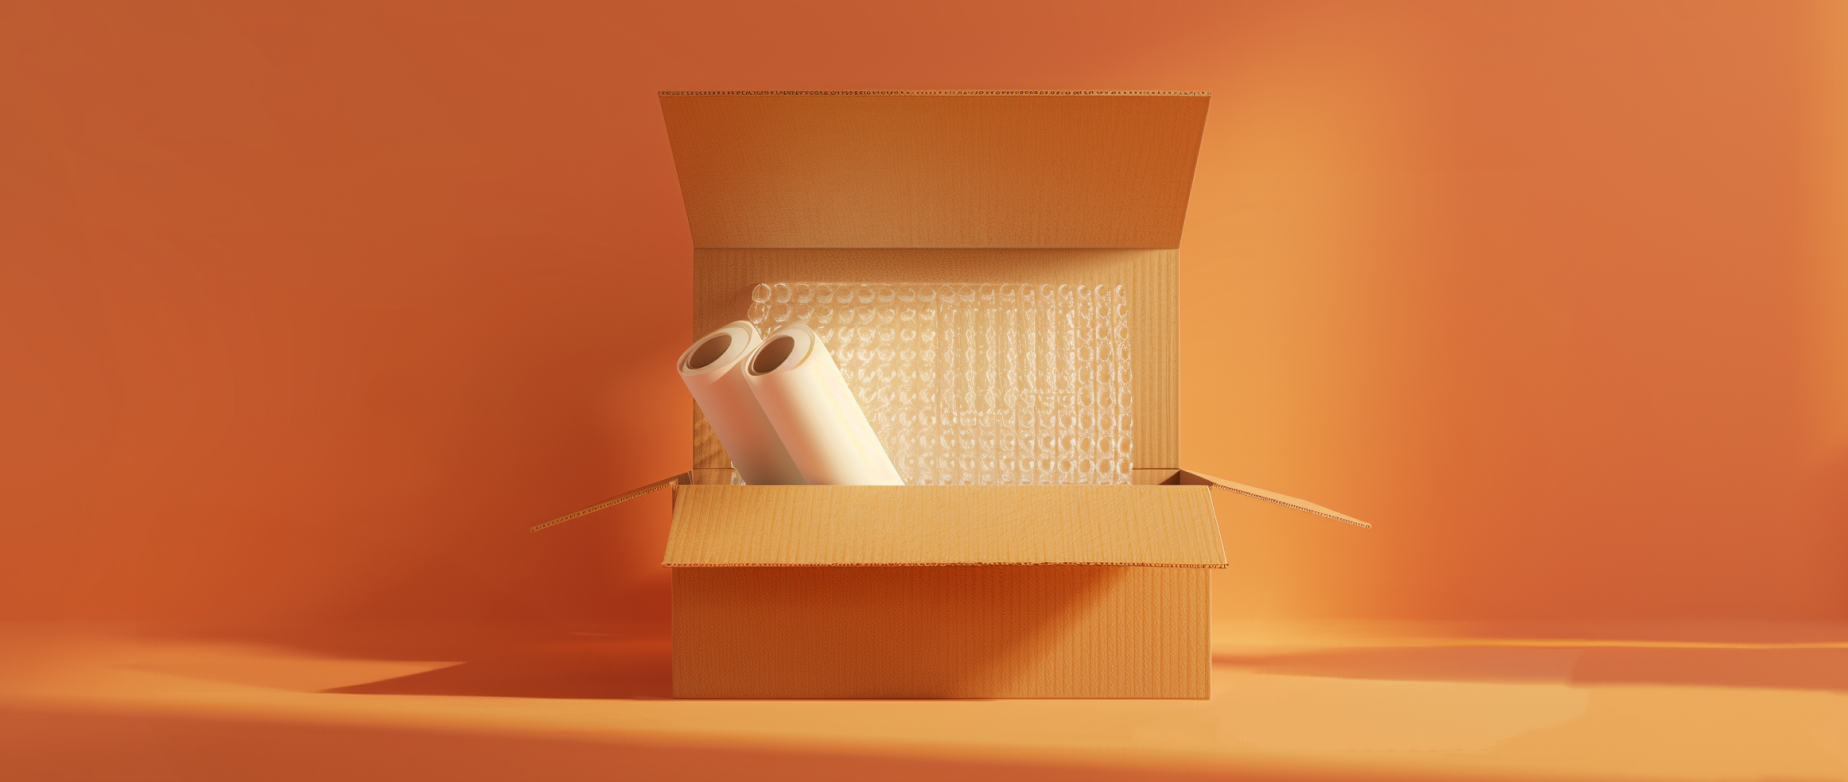 Shipping supplies for art prints including boxes, bubble wrap, and shipping tubes on an orange background.